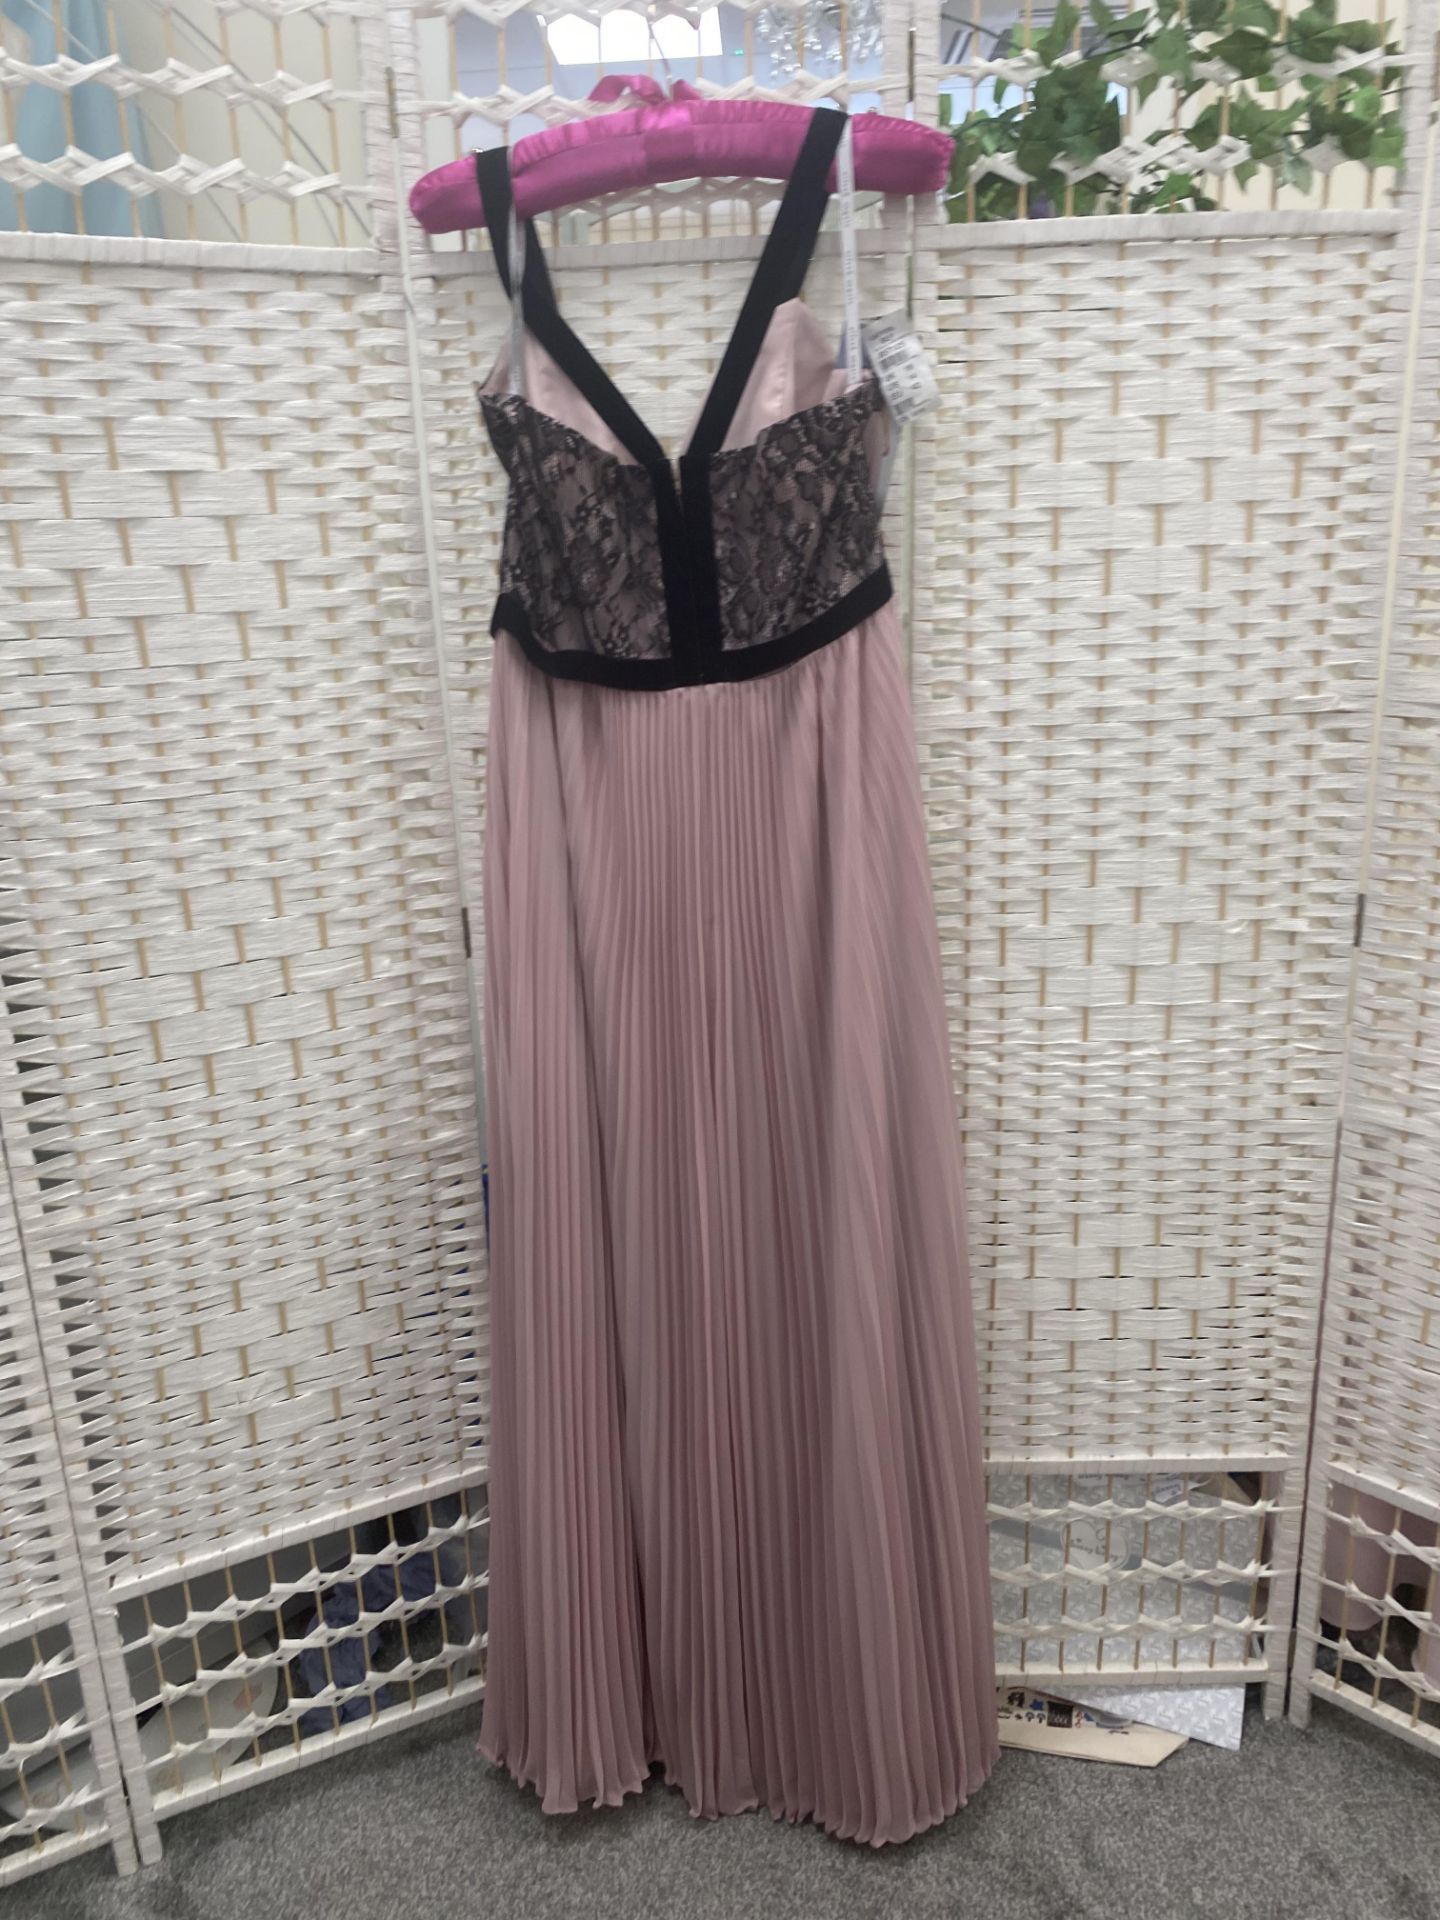 Alfred Angelo prom dress size 16 black lace bodice, blush pink skirt - Image 3 of 6